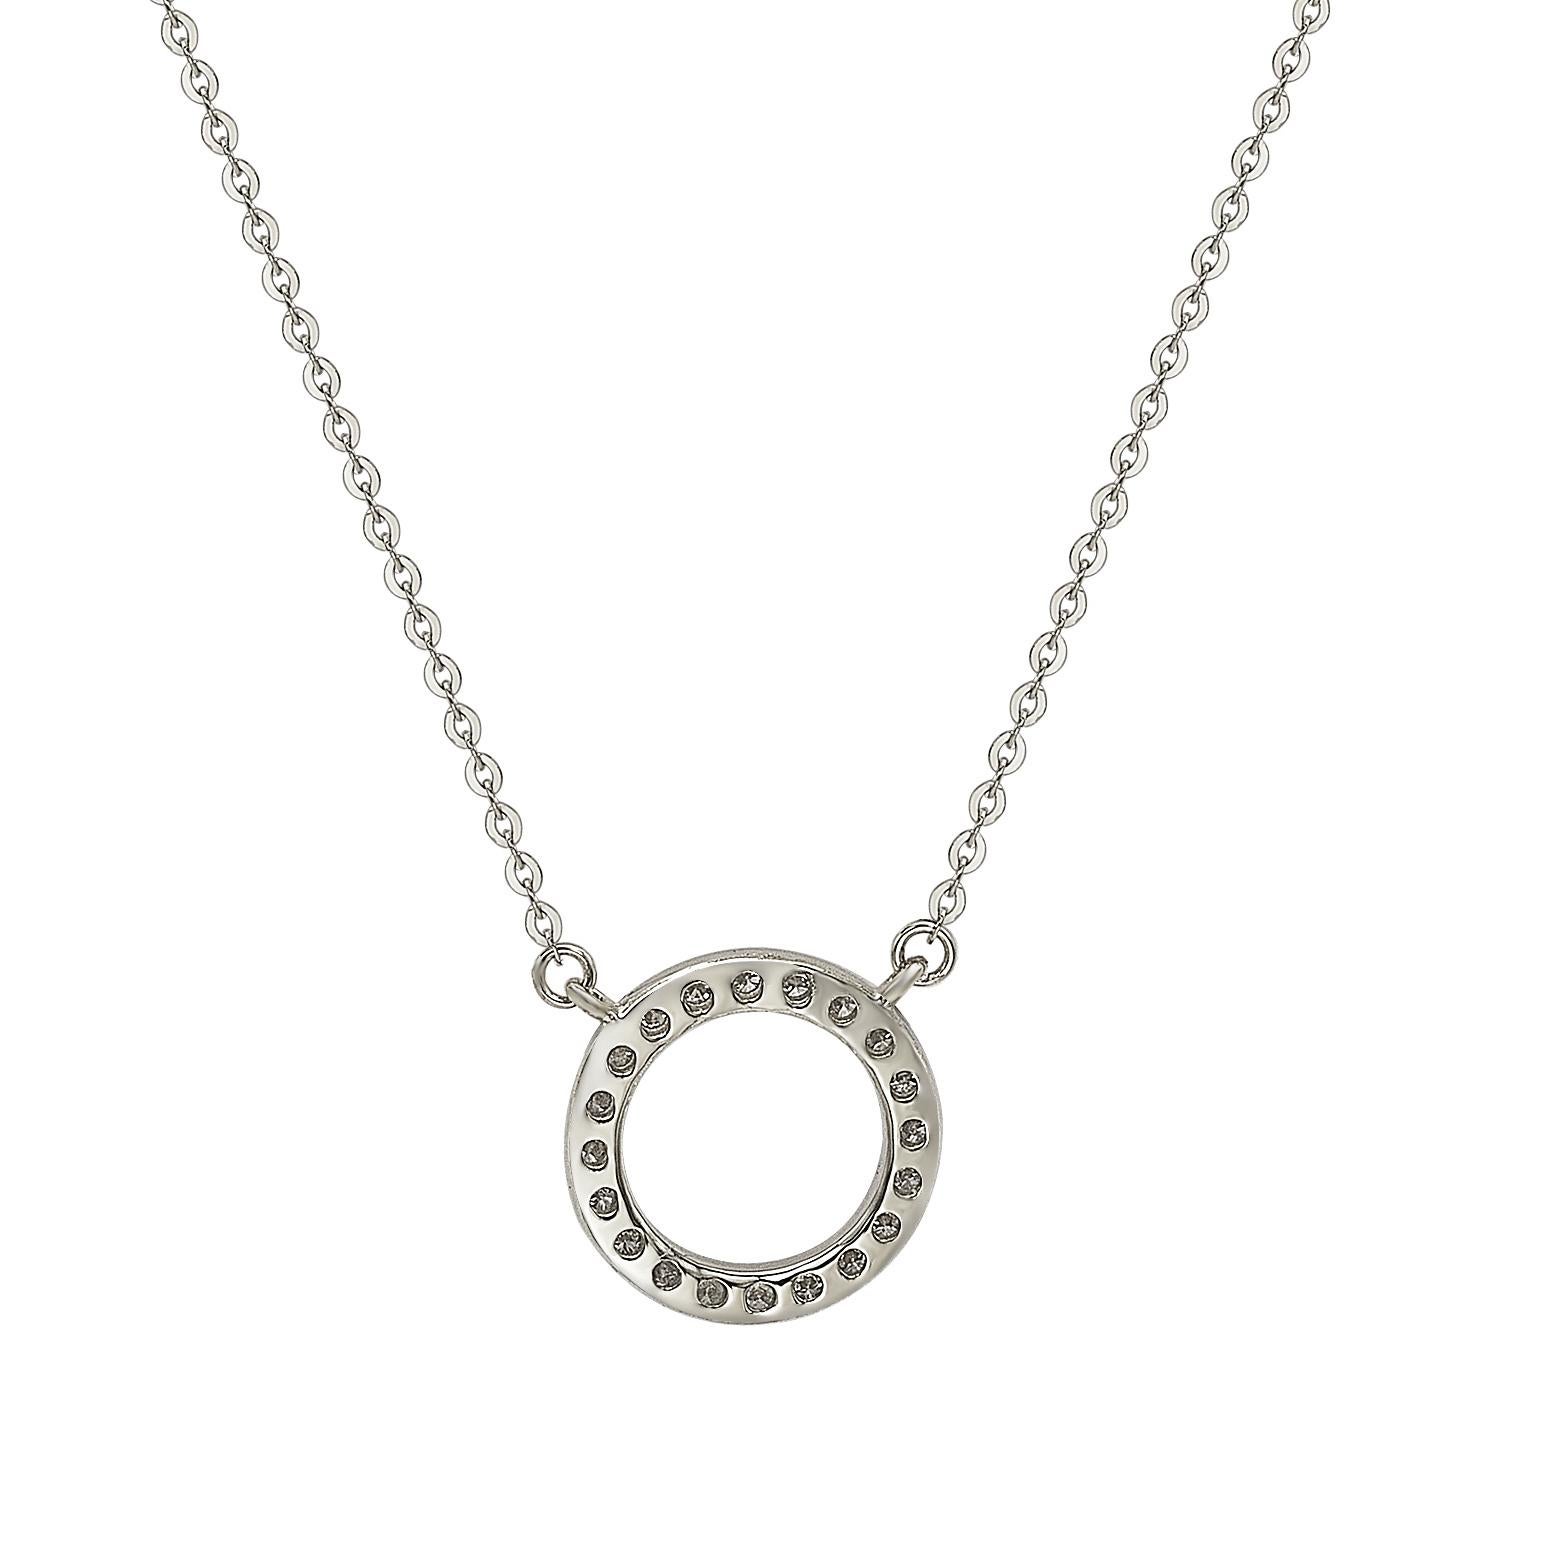 This breathtaking Suzy Levian circle necklace features natural diamonds, hand-set in 14-Karat white gold. It's the perfect gift to let someone special know you're thinking of them. Each circle necklace features a single row of pave natural white